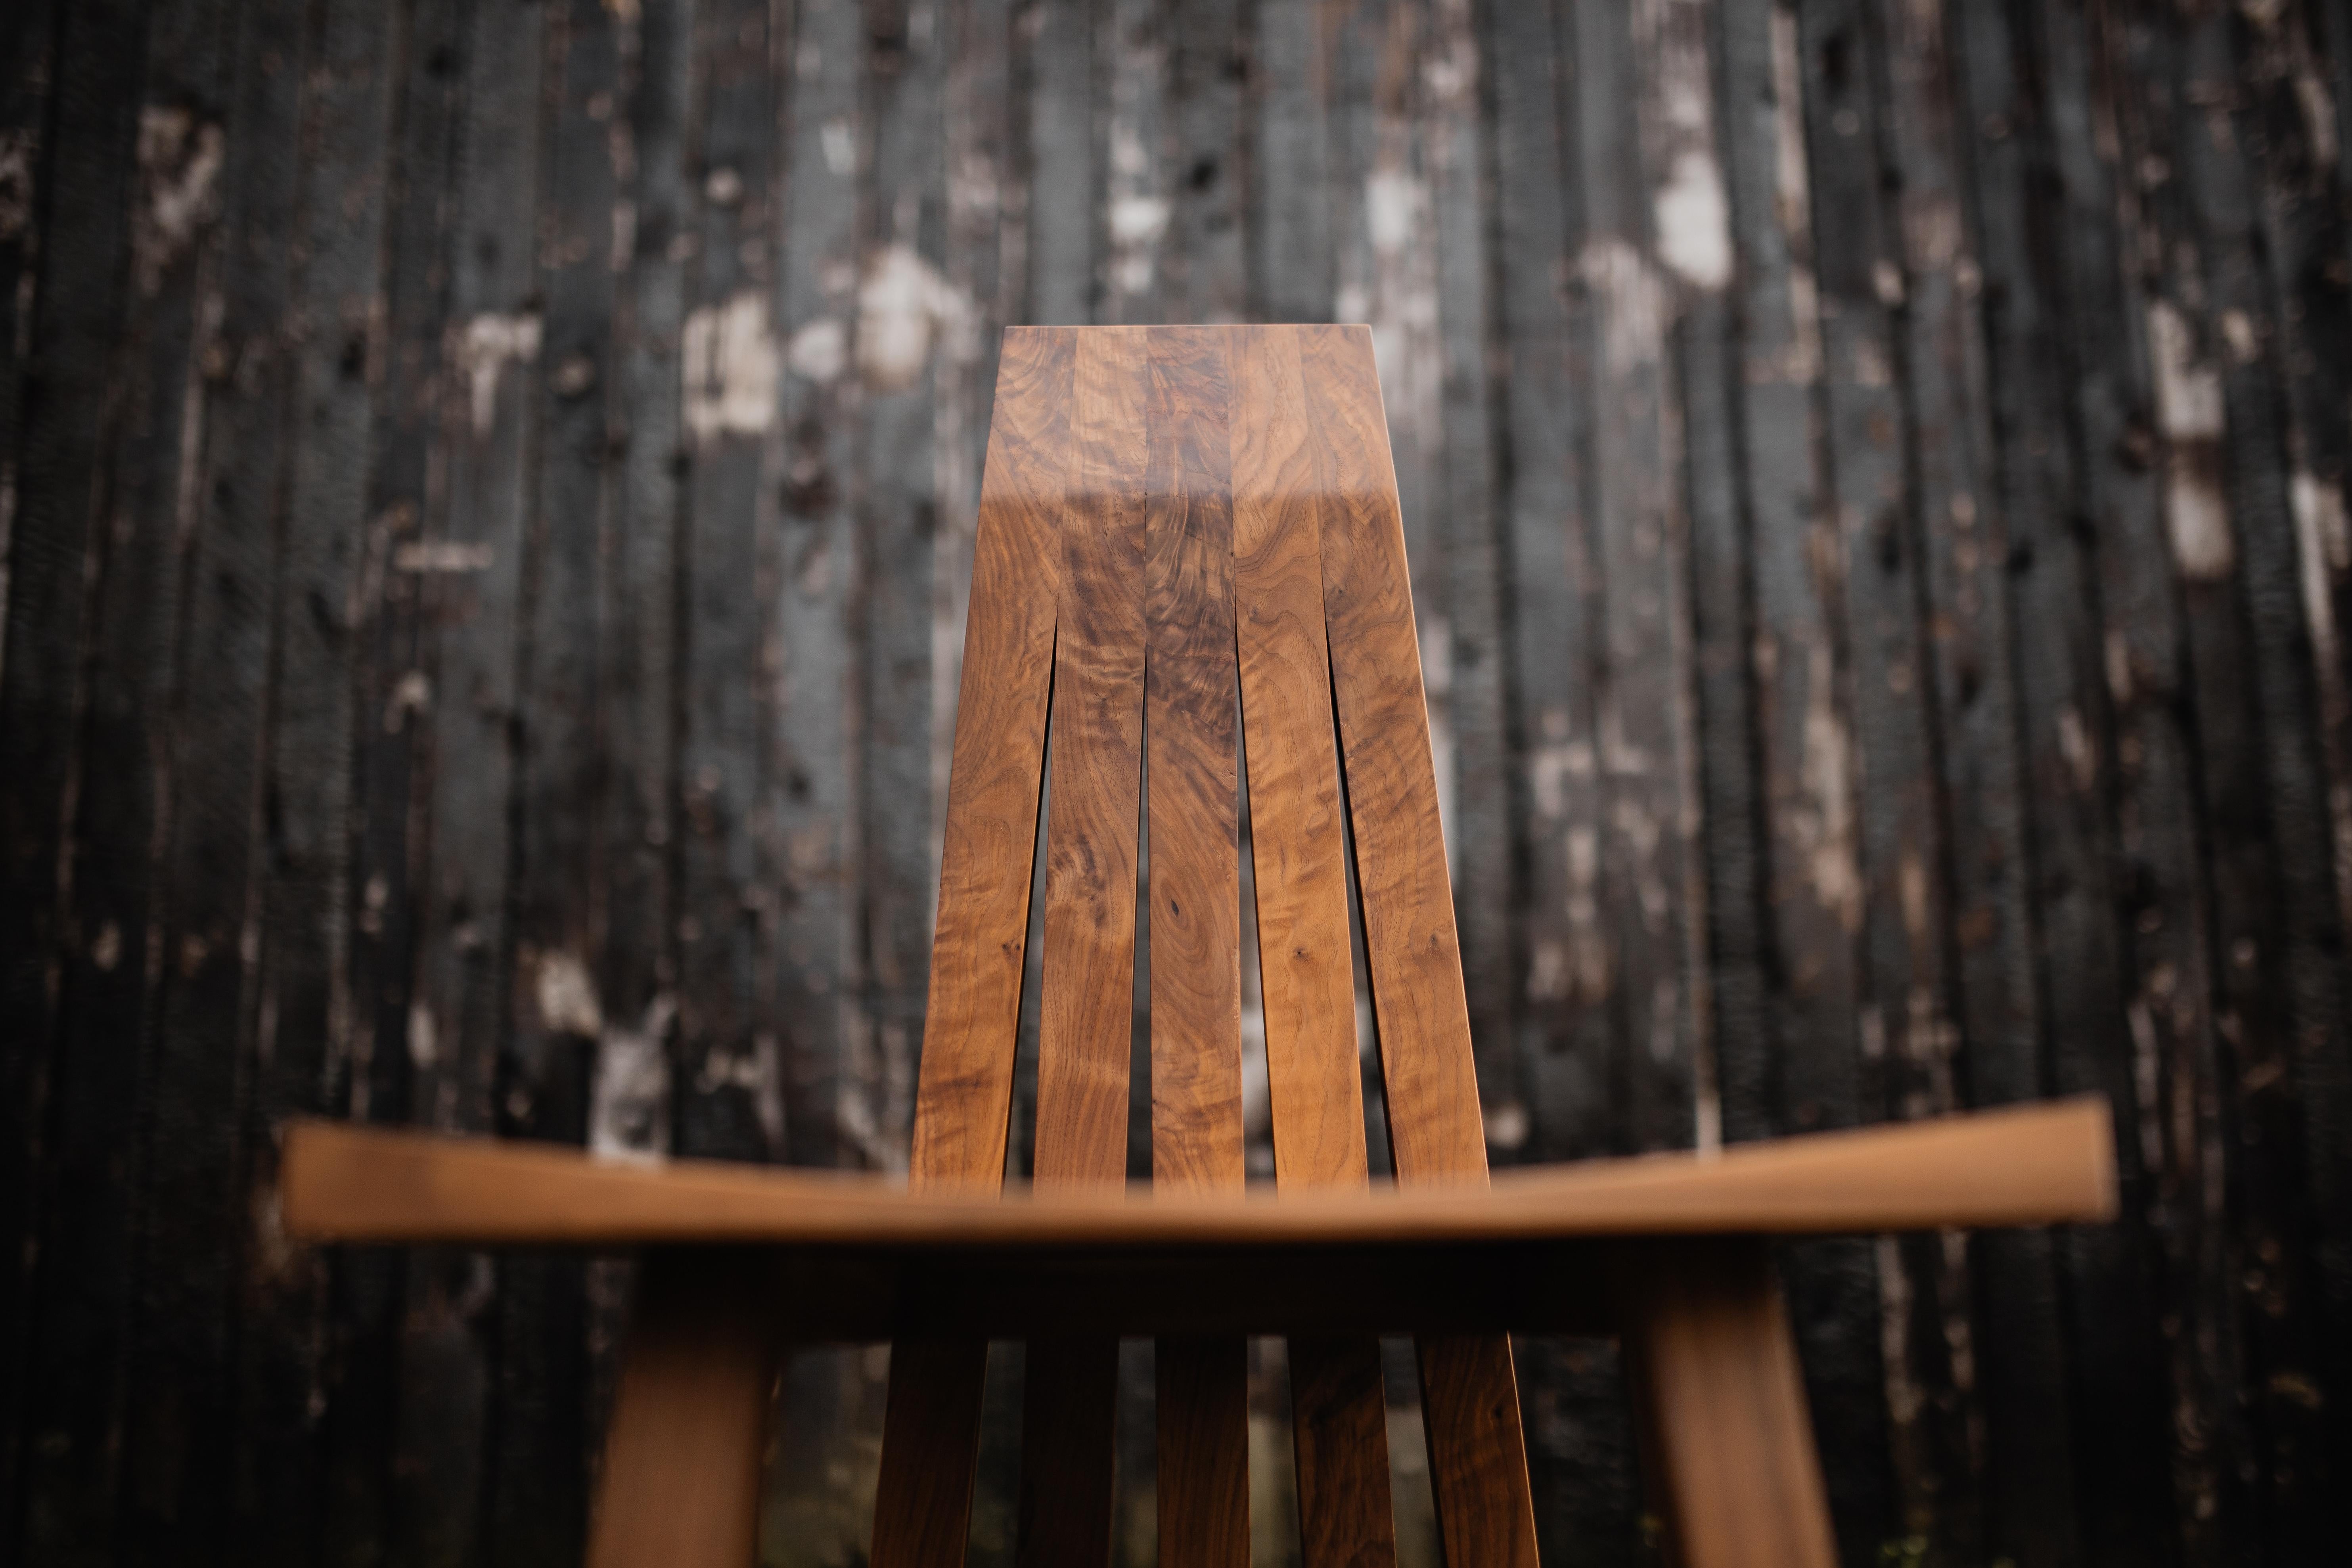 The Imani Dining chair is a hardwood handmade chair, meant to represent boldness. With it’s Brutalist, yet elegant style it makes a statement in a room. This chair was designed from the back as this is the part of the piece that you see most during